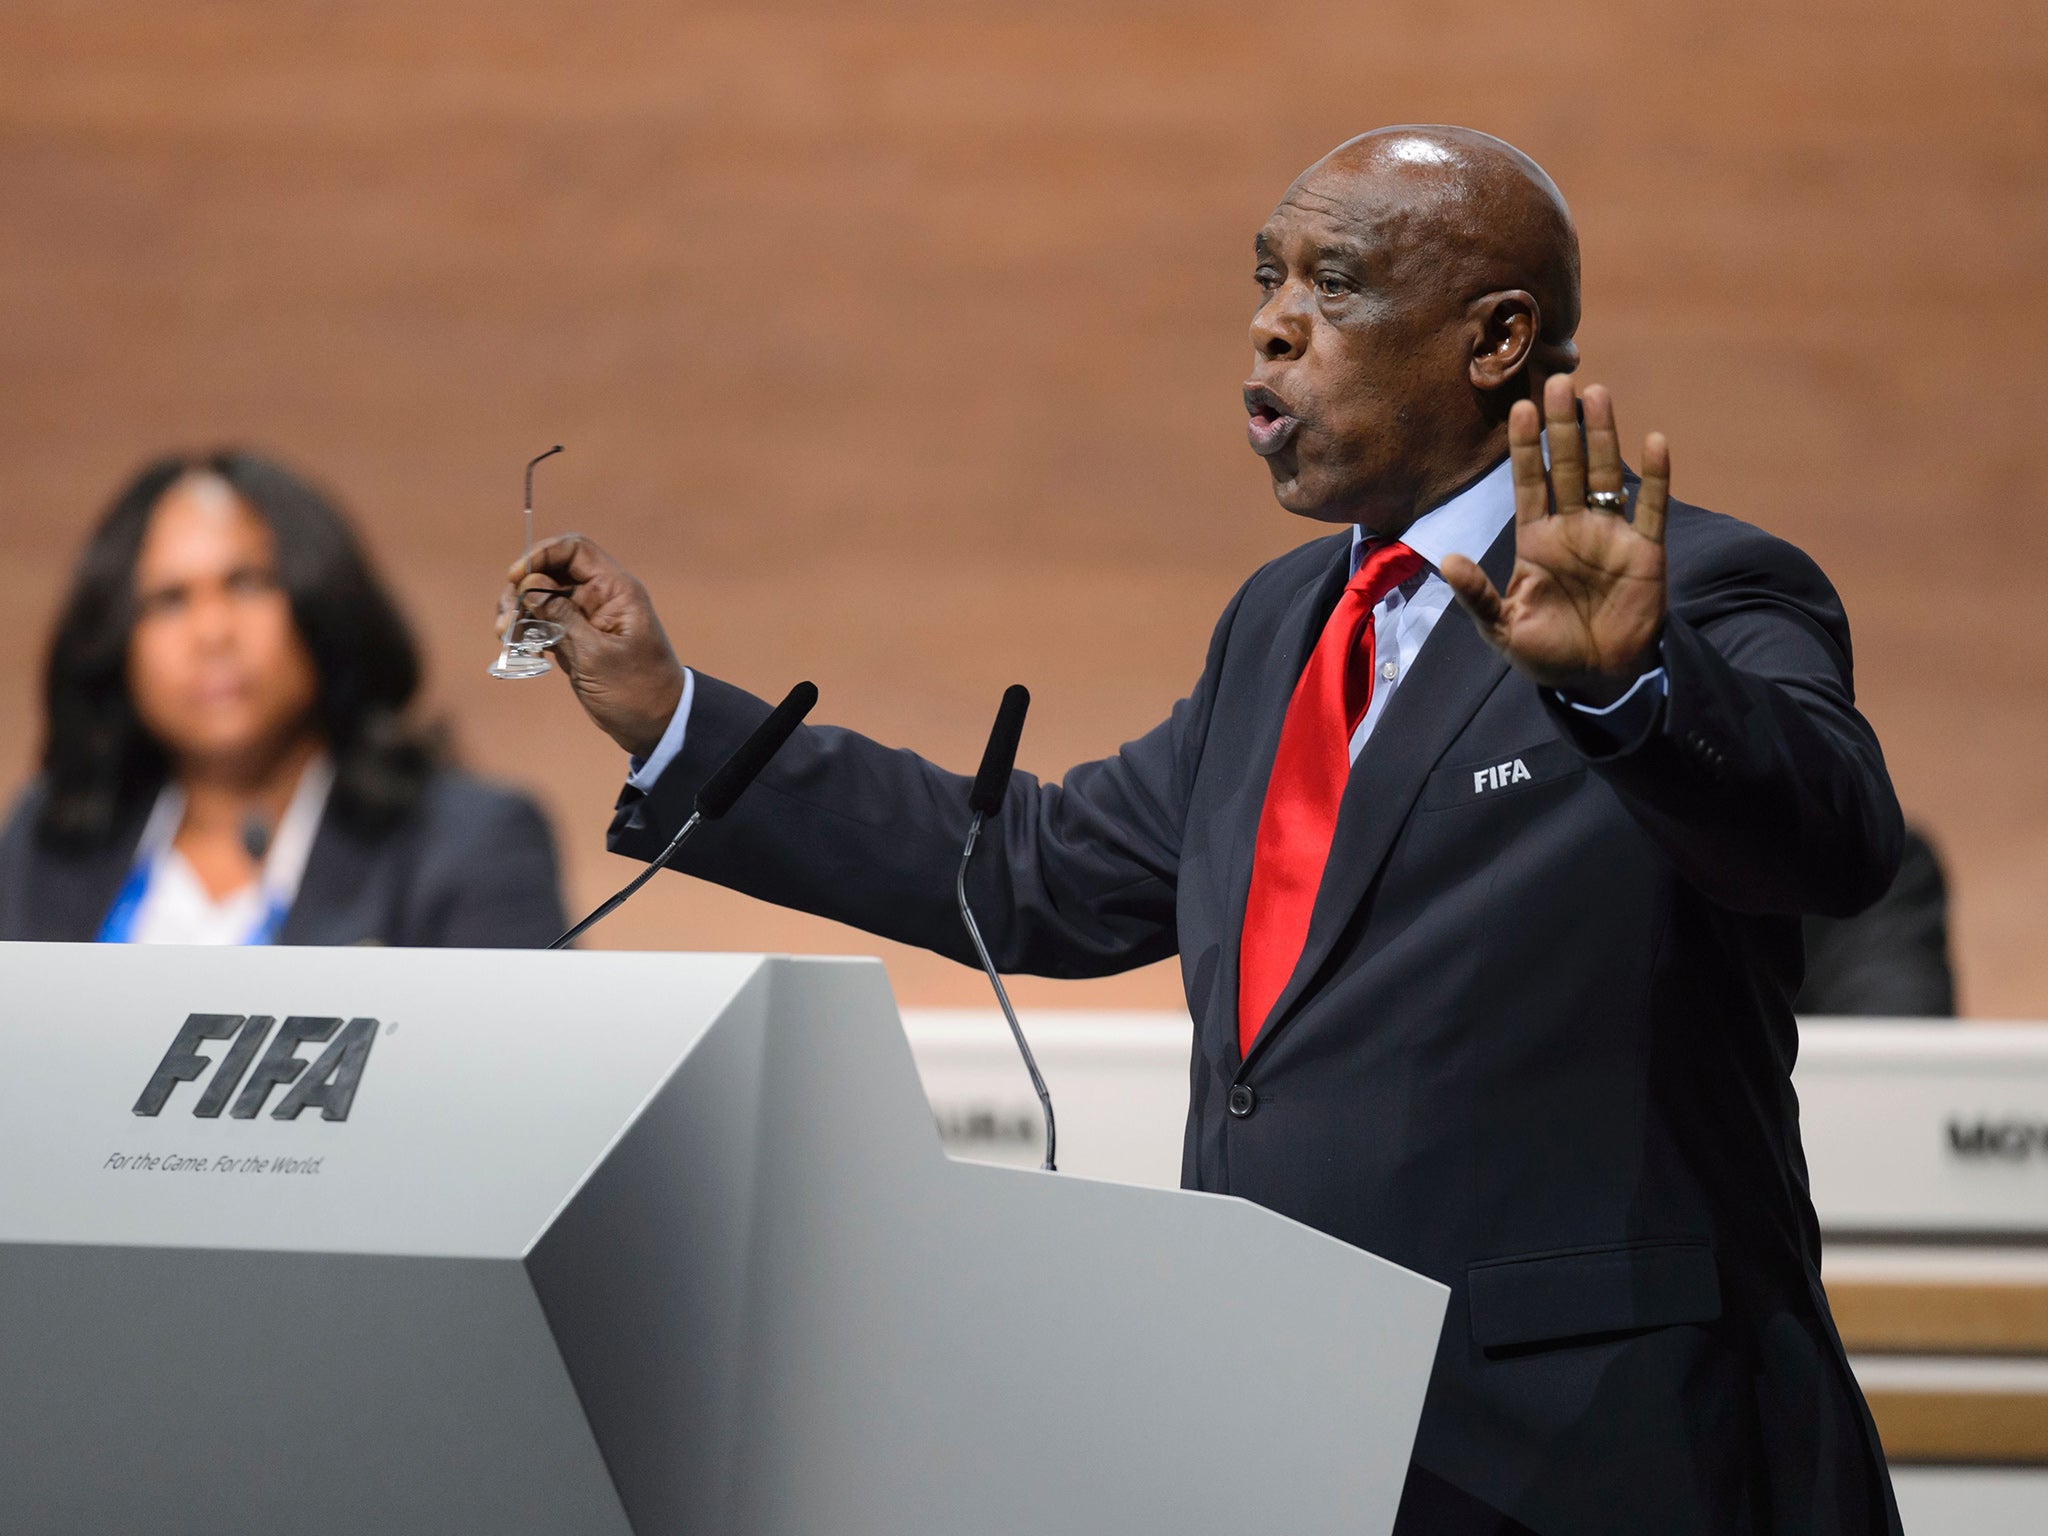 Tokyo Sexwale during his speech to Fifa's Extraordinary Congress